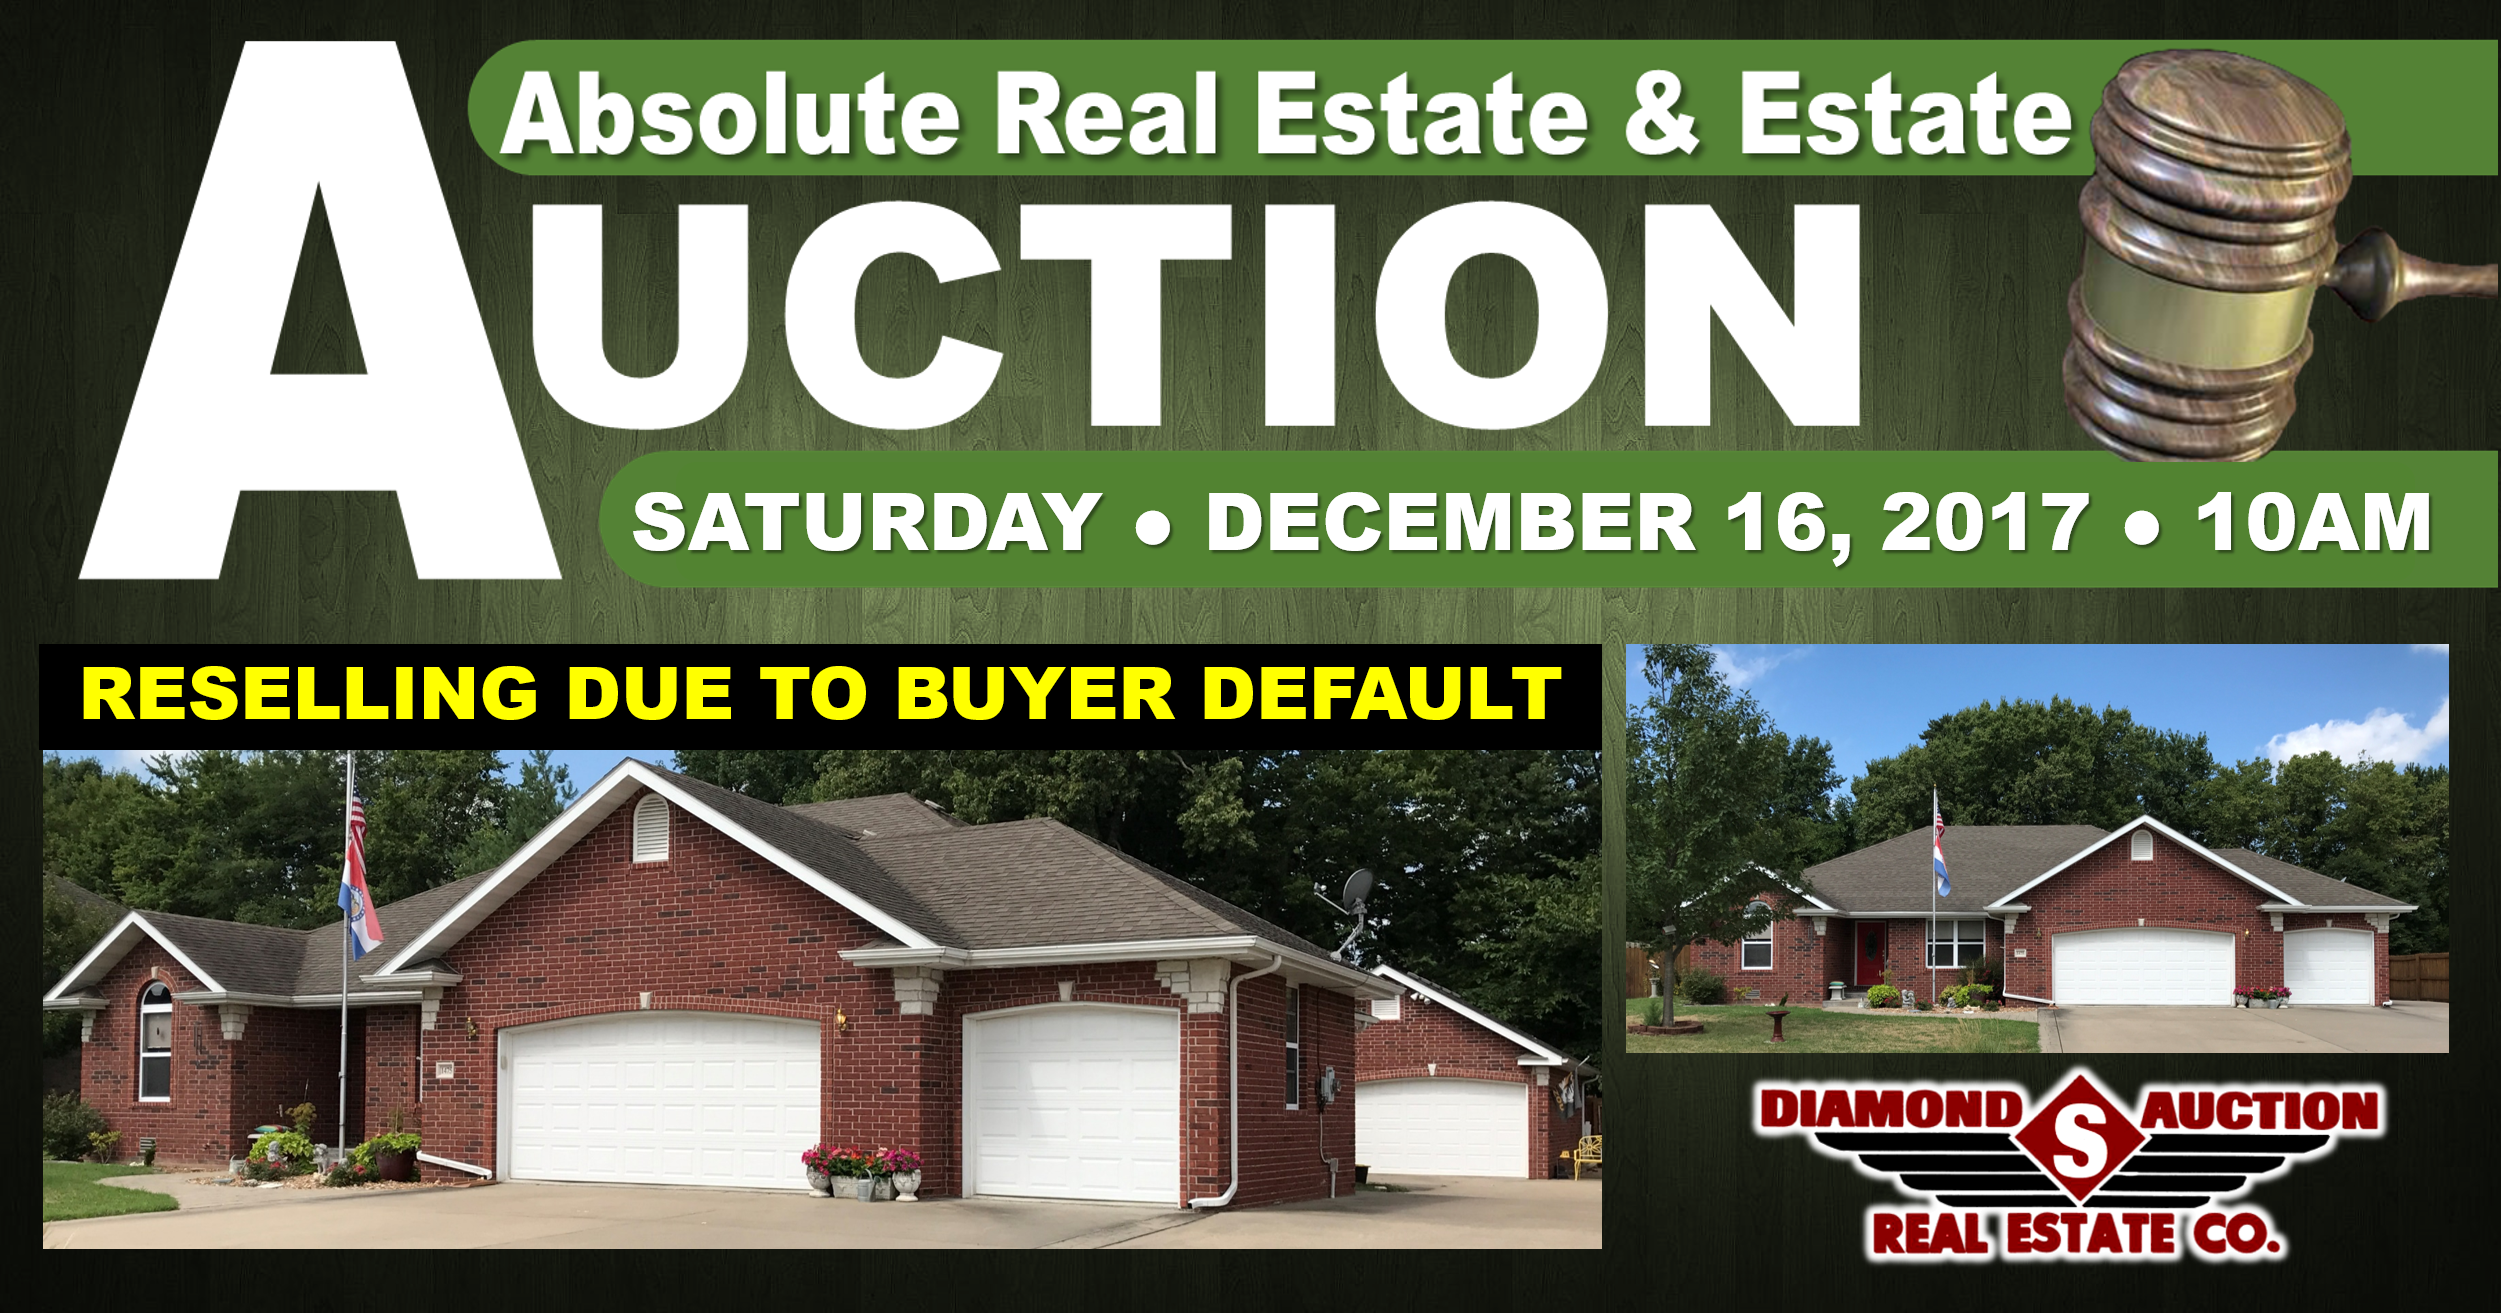 ABSOLUTE REAL ESTATE & ESTATE AUCTION